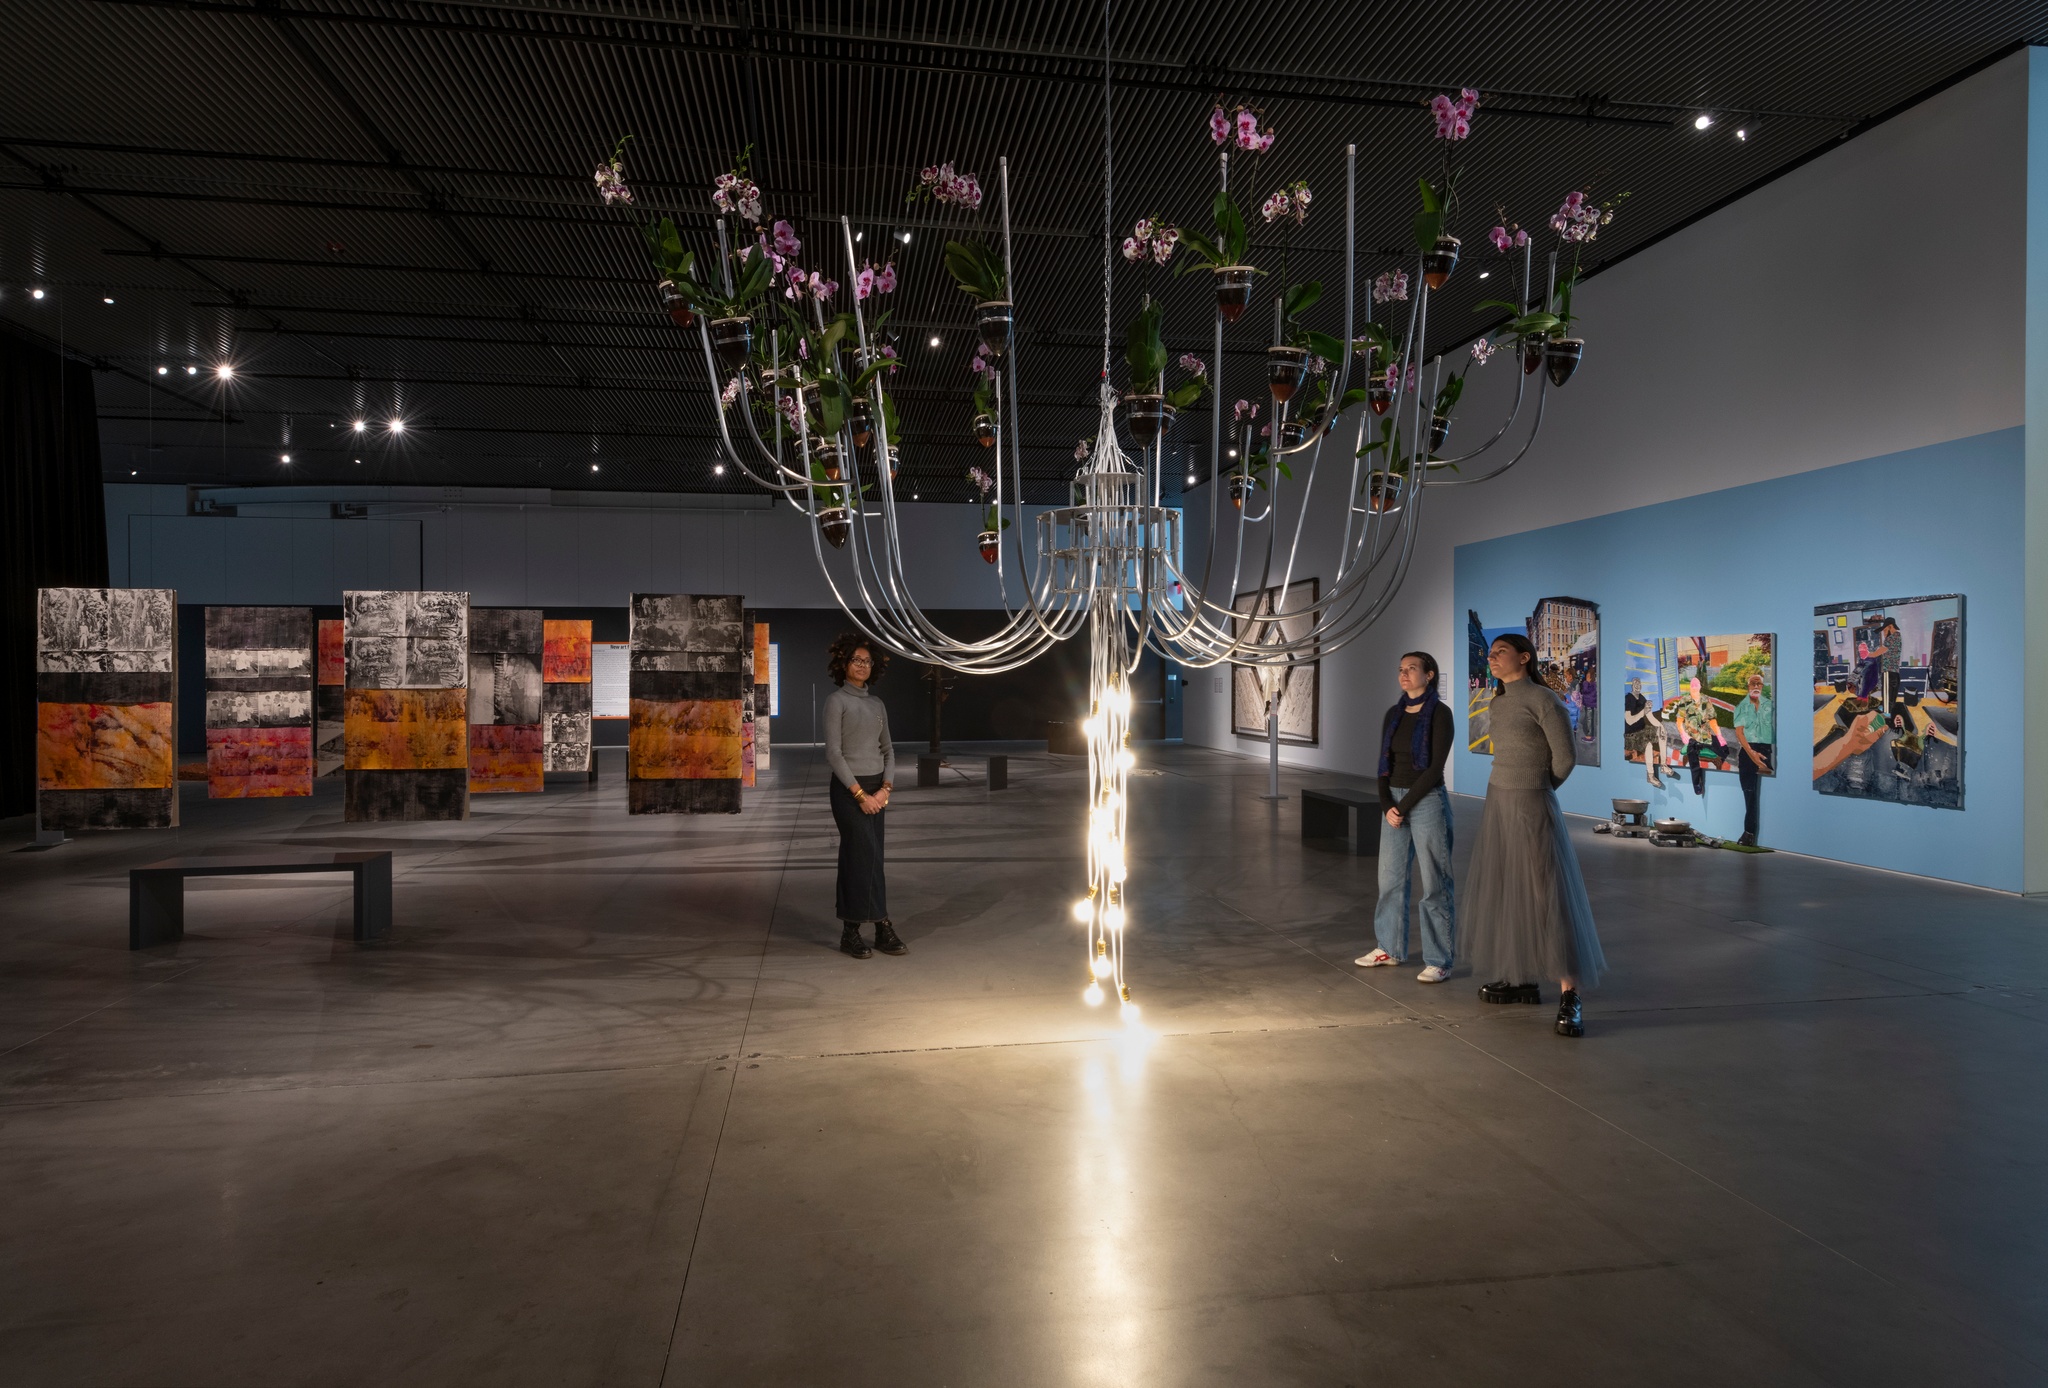 Three gallery goers stand around a sculpture that hangs from the ceiling. It resembles a chandelier with long aluminum pipes bent upward gracefully. At the end of each pipe hangs an orchid in a ceramic pot. From the center of the sculpture, a string of LED light bulbs hangs to the ground.